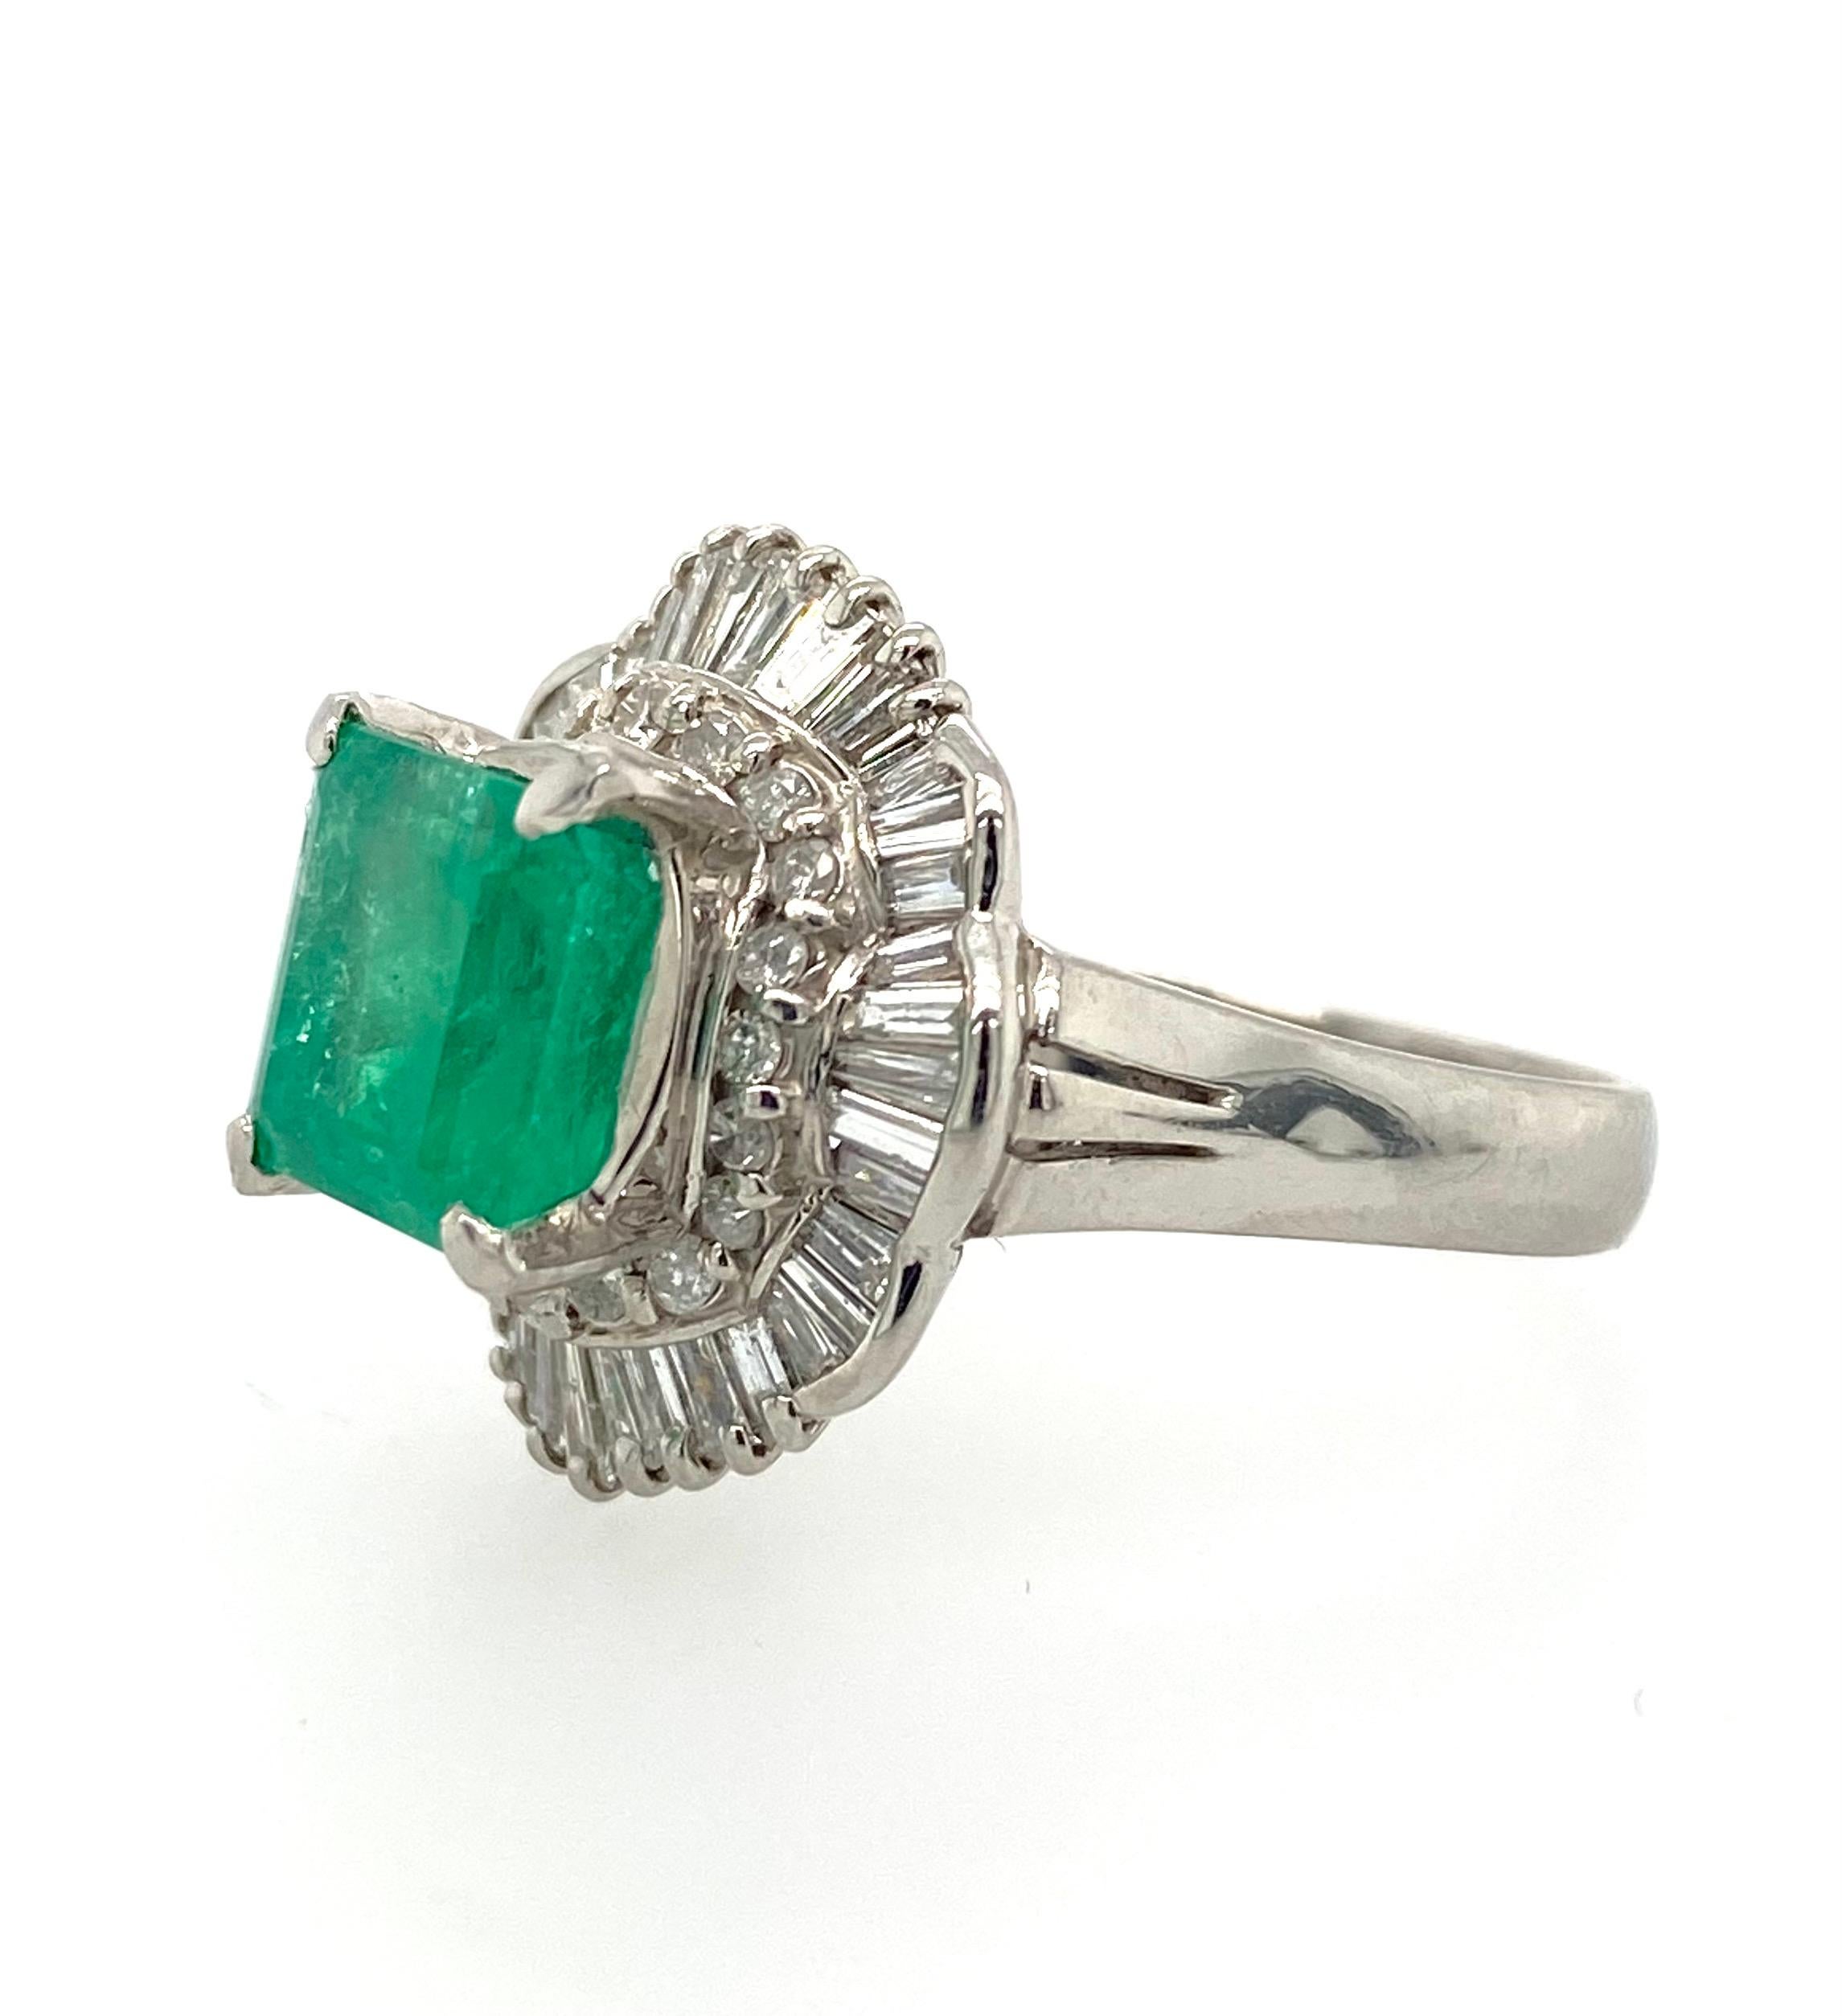 This ring is a stunning piece of jewelry that features a 2.53 carat Colombian emerald as its centerpiece. The emerald is a beautiful and vibrant green color, and it is known for its unique and attractive color. Colombian emeralds are considered to